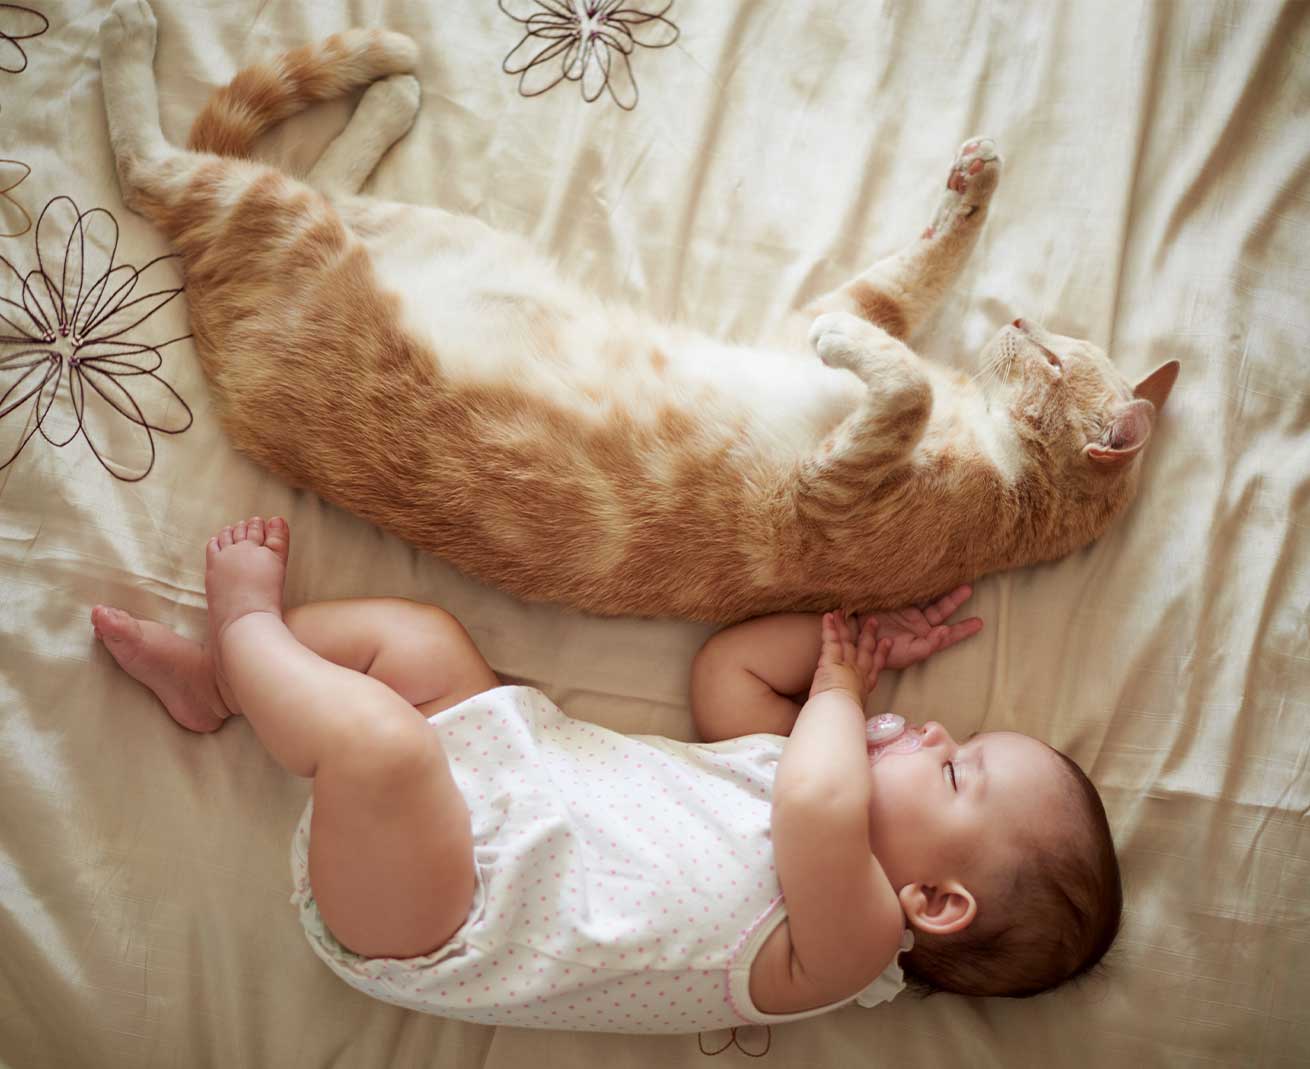 Don’t force your cat to interact with the newborn